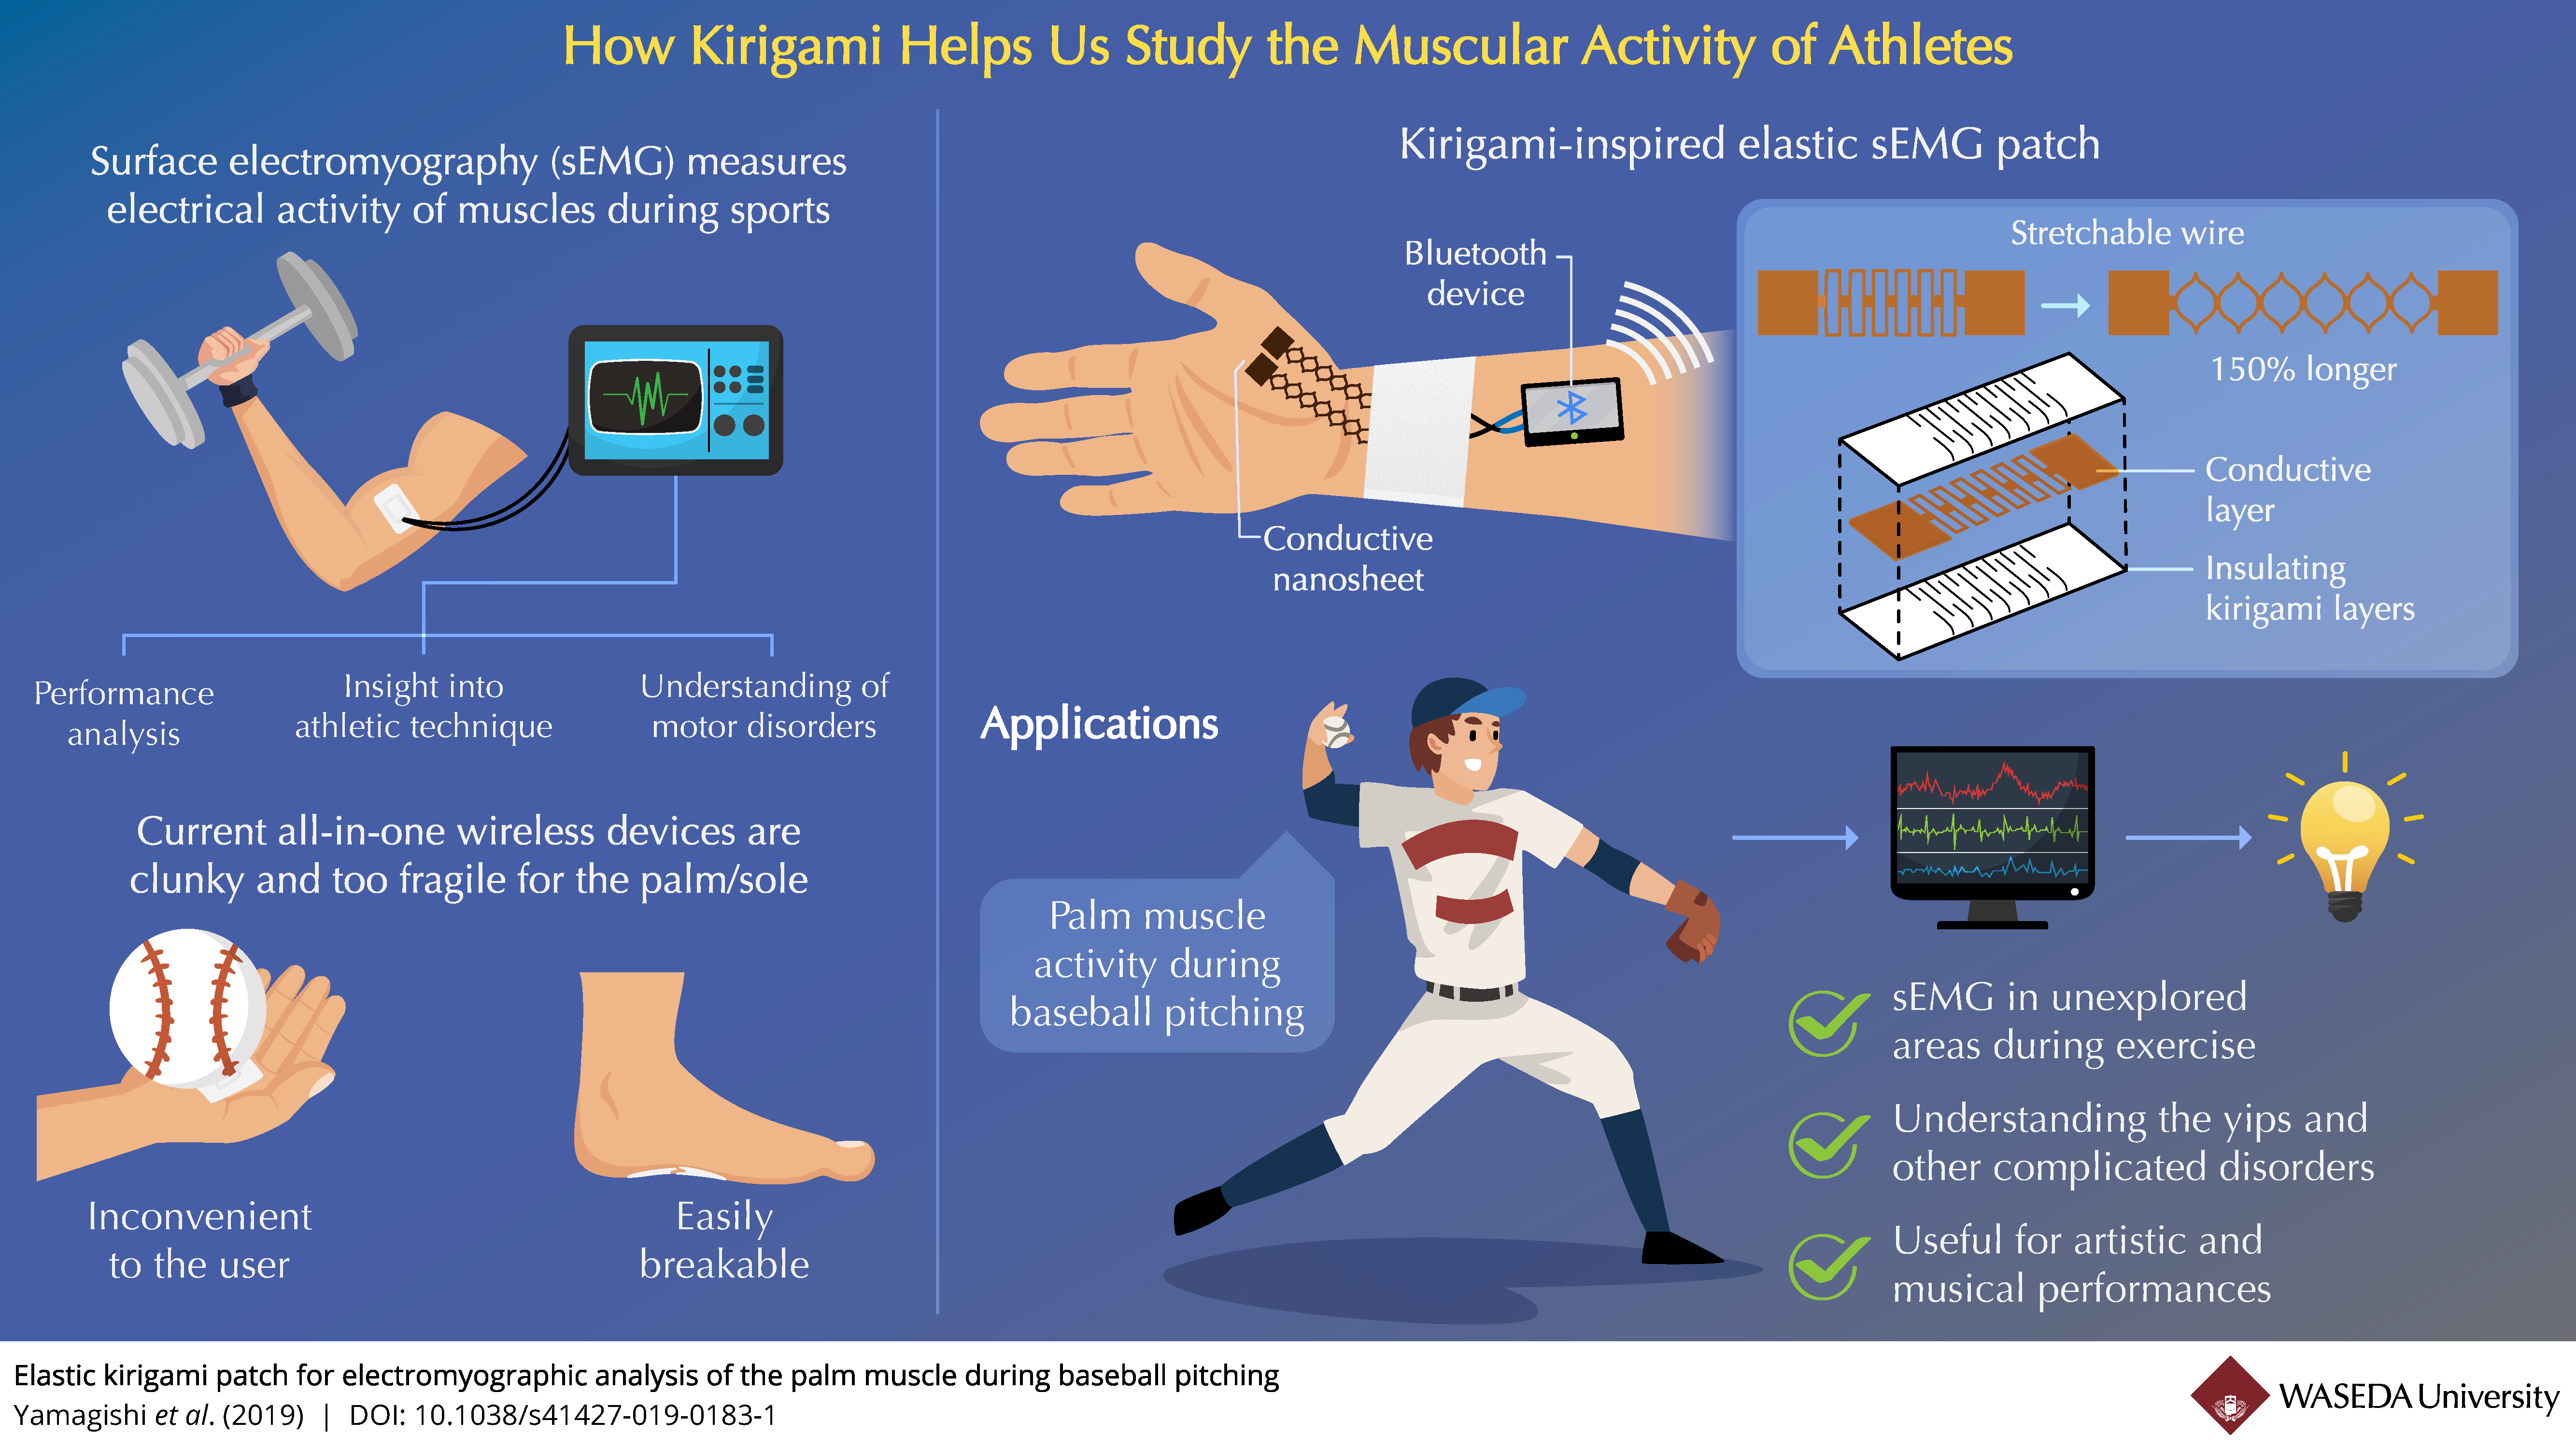 Kirigami can Help us Study the Muscular Activity of Athletes